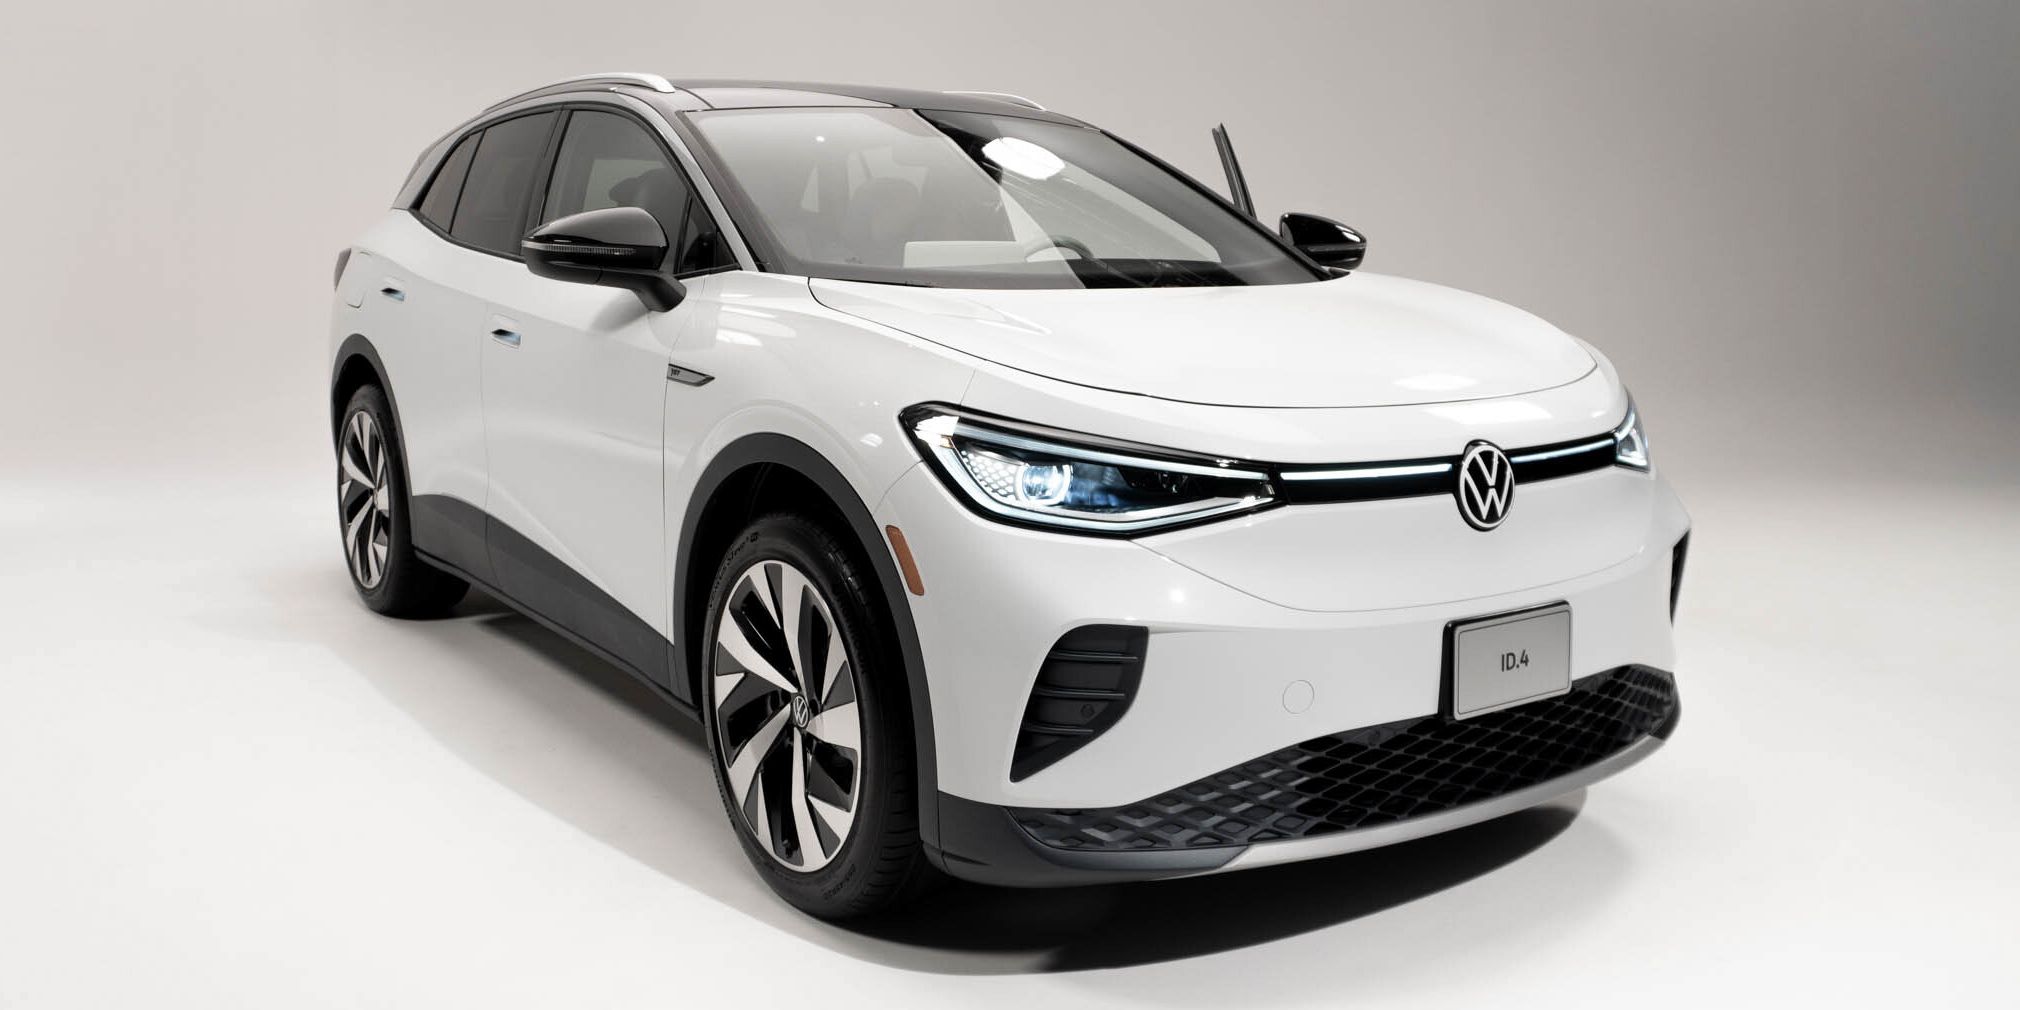 2021 Volkswagen ID.4 Electrifies VW's SUV Lineup - My Own Auto